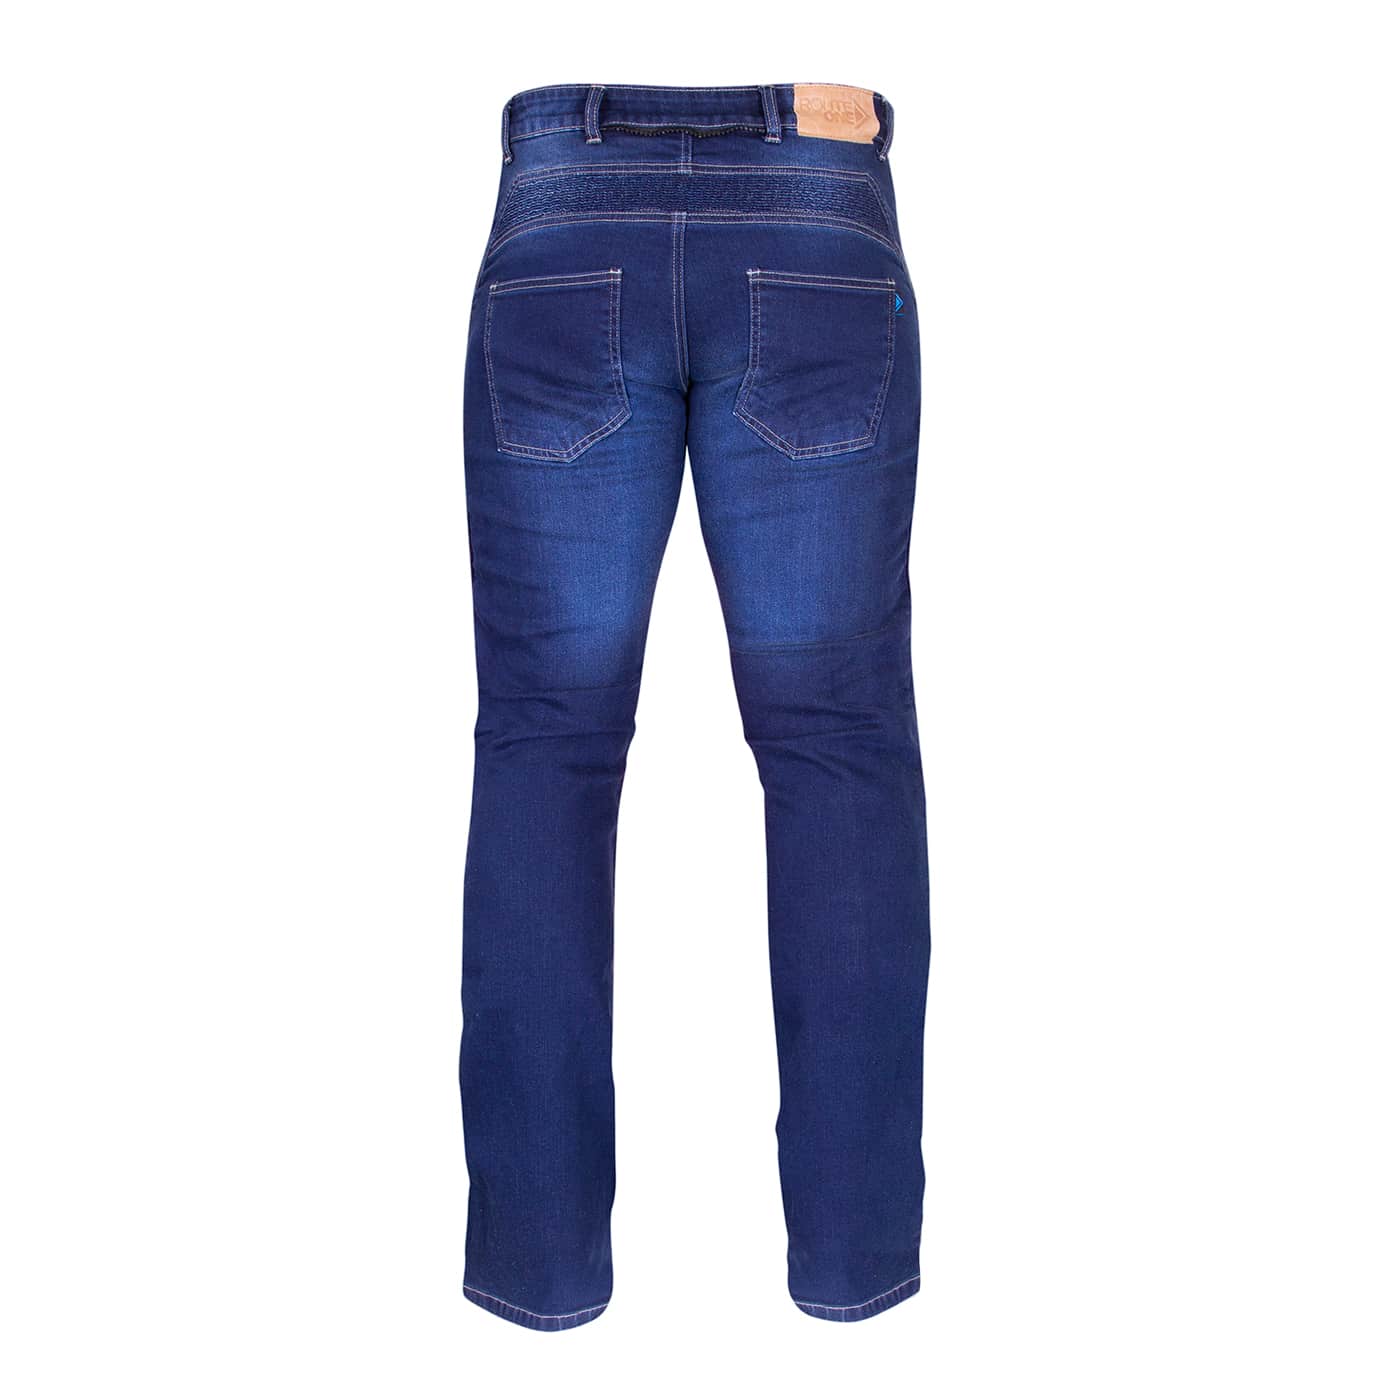 A studio image of the Merlin Cooper jeans in blue